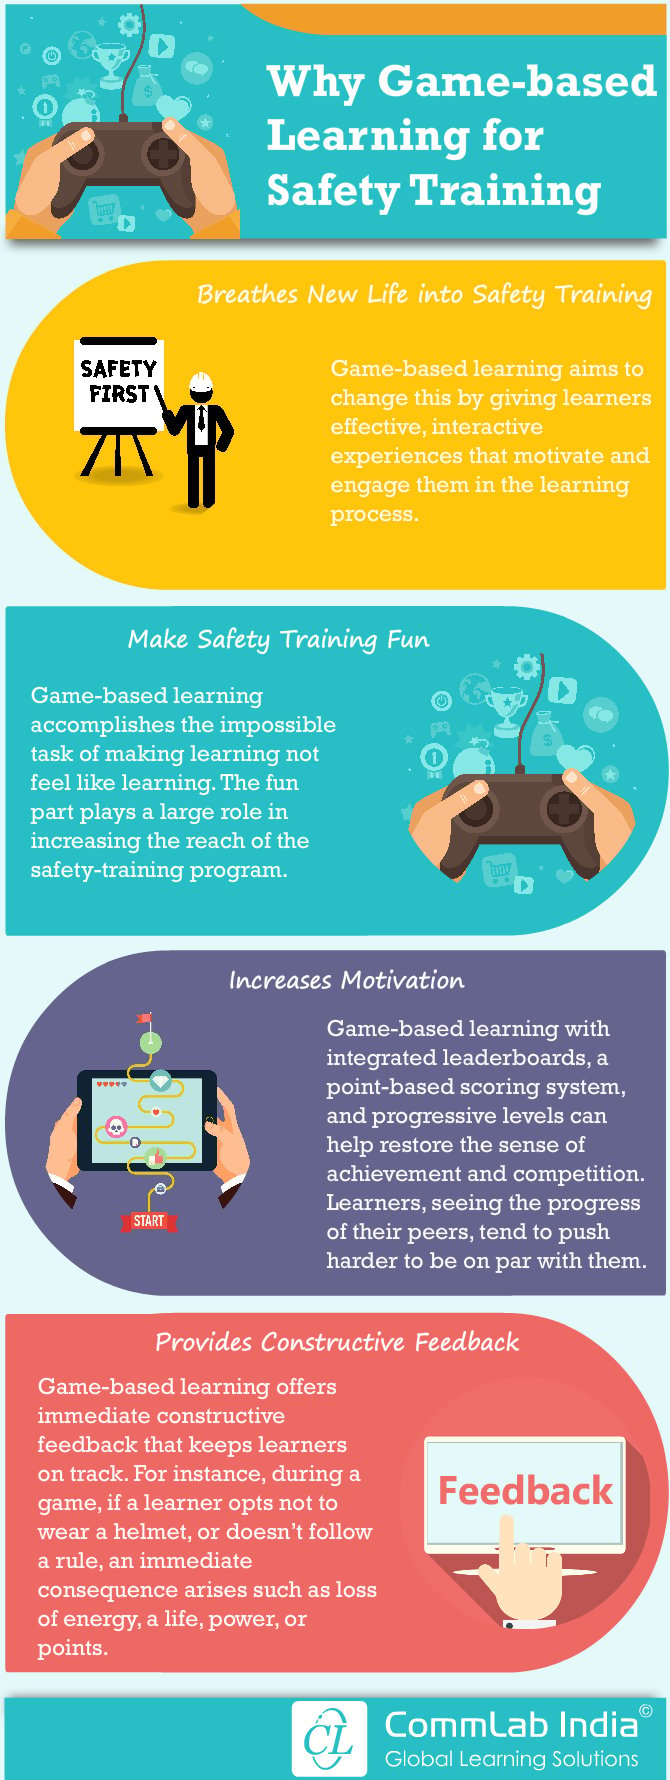 Game-based Learning for Safety Training